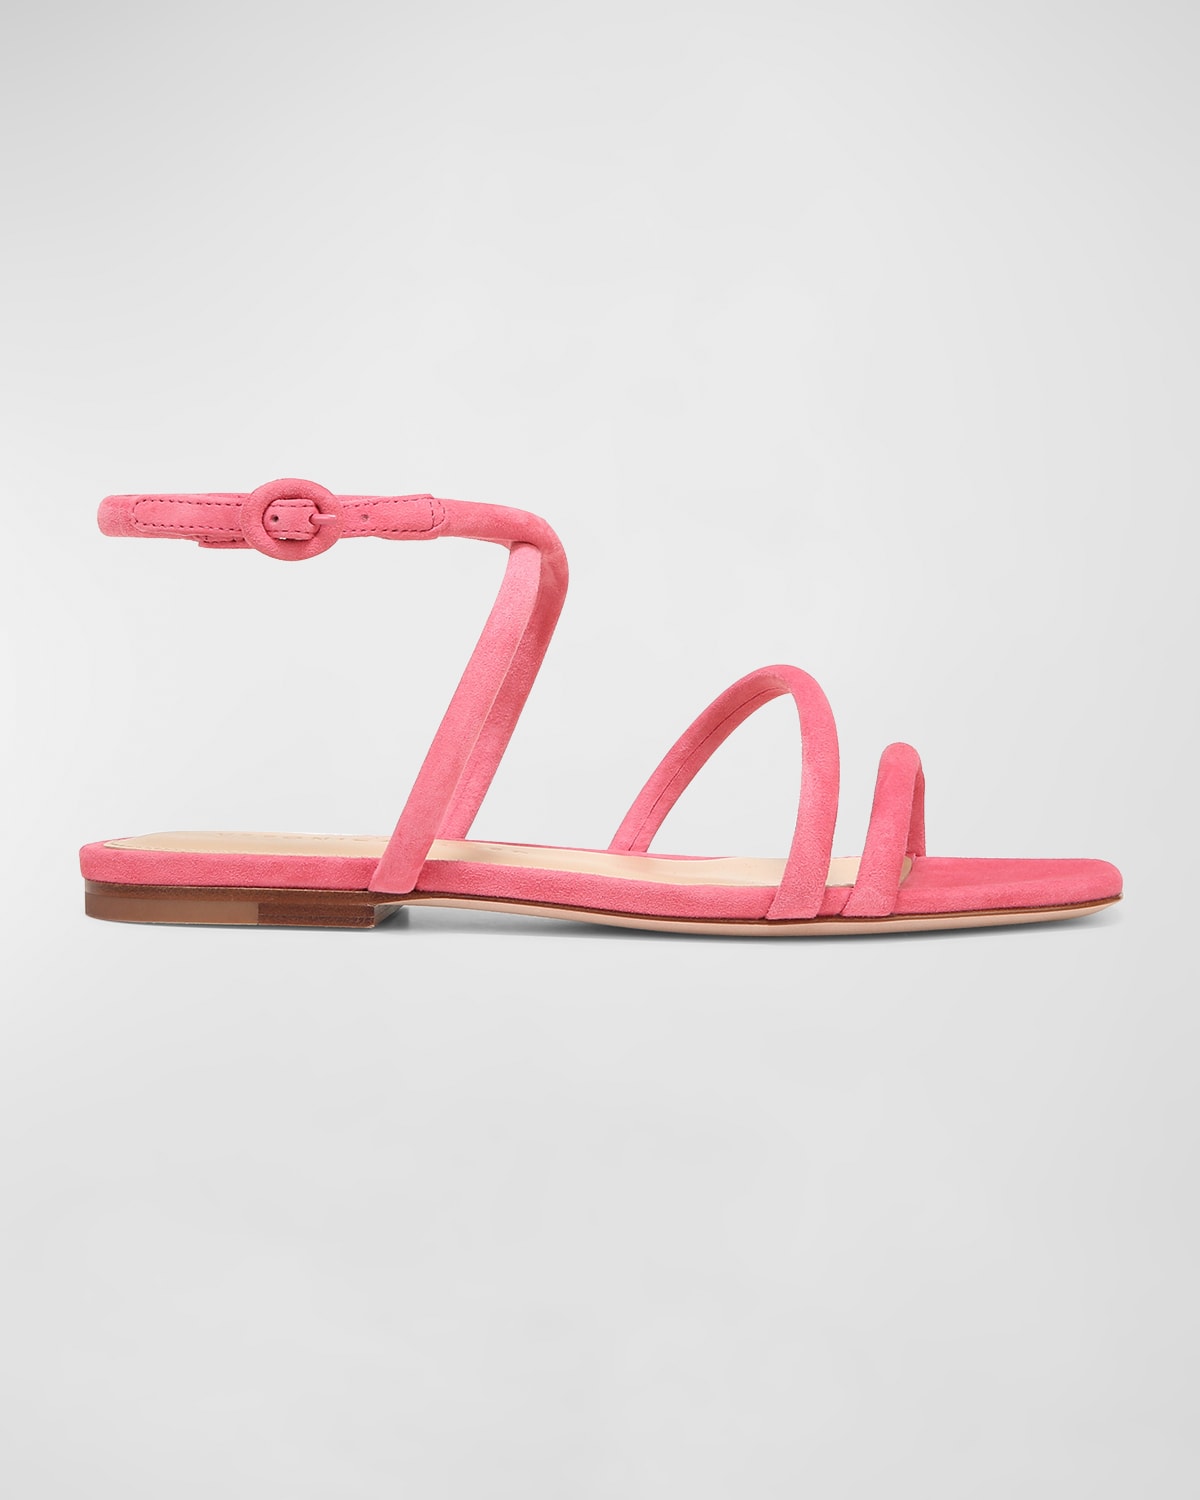 Veronica Beard Maci Flat Ankle-strap Sandals In Coral Pink Suede